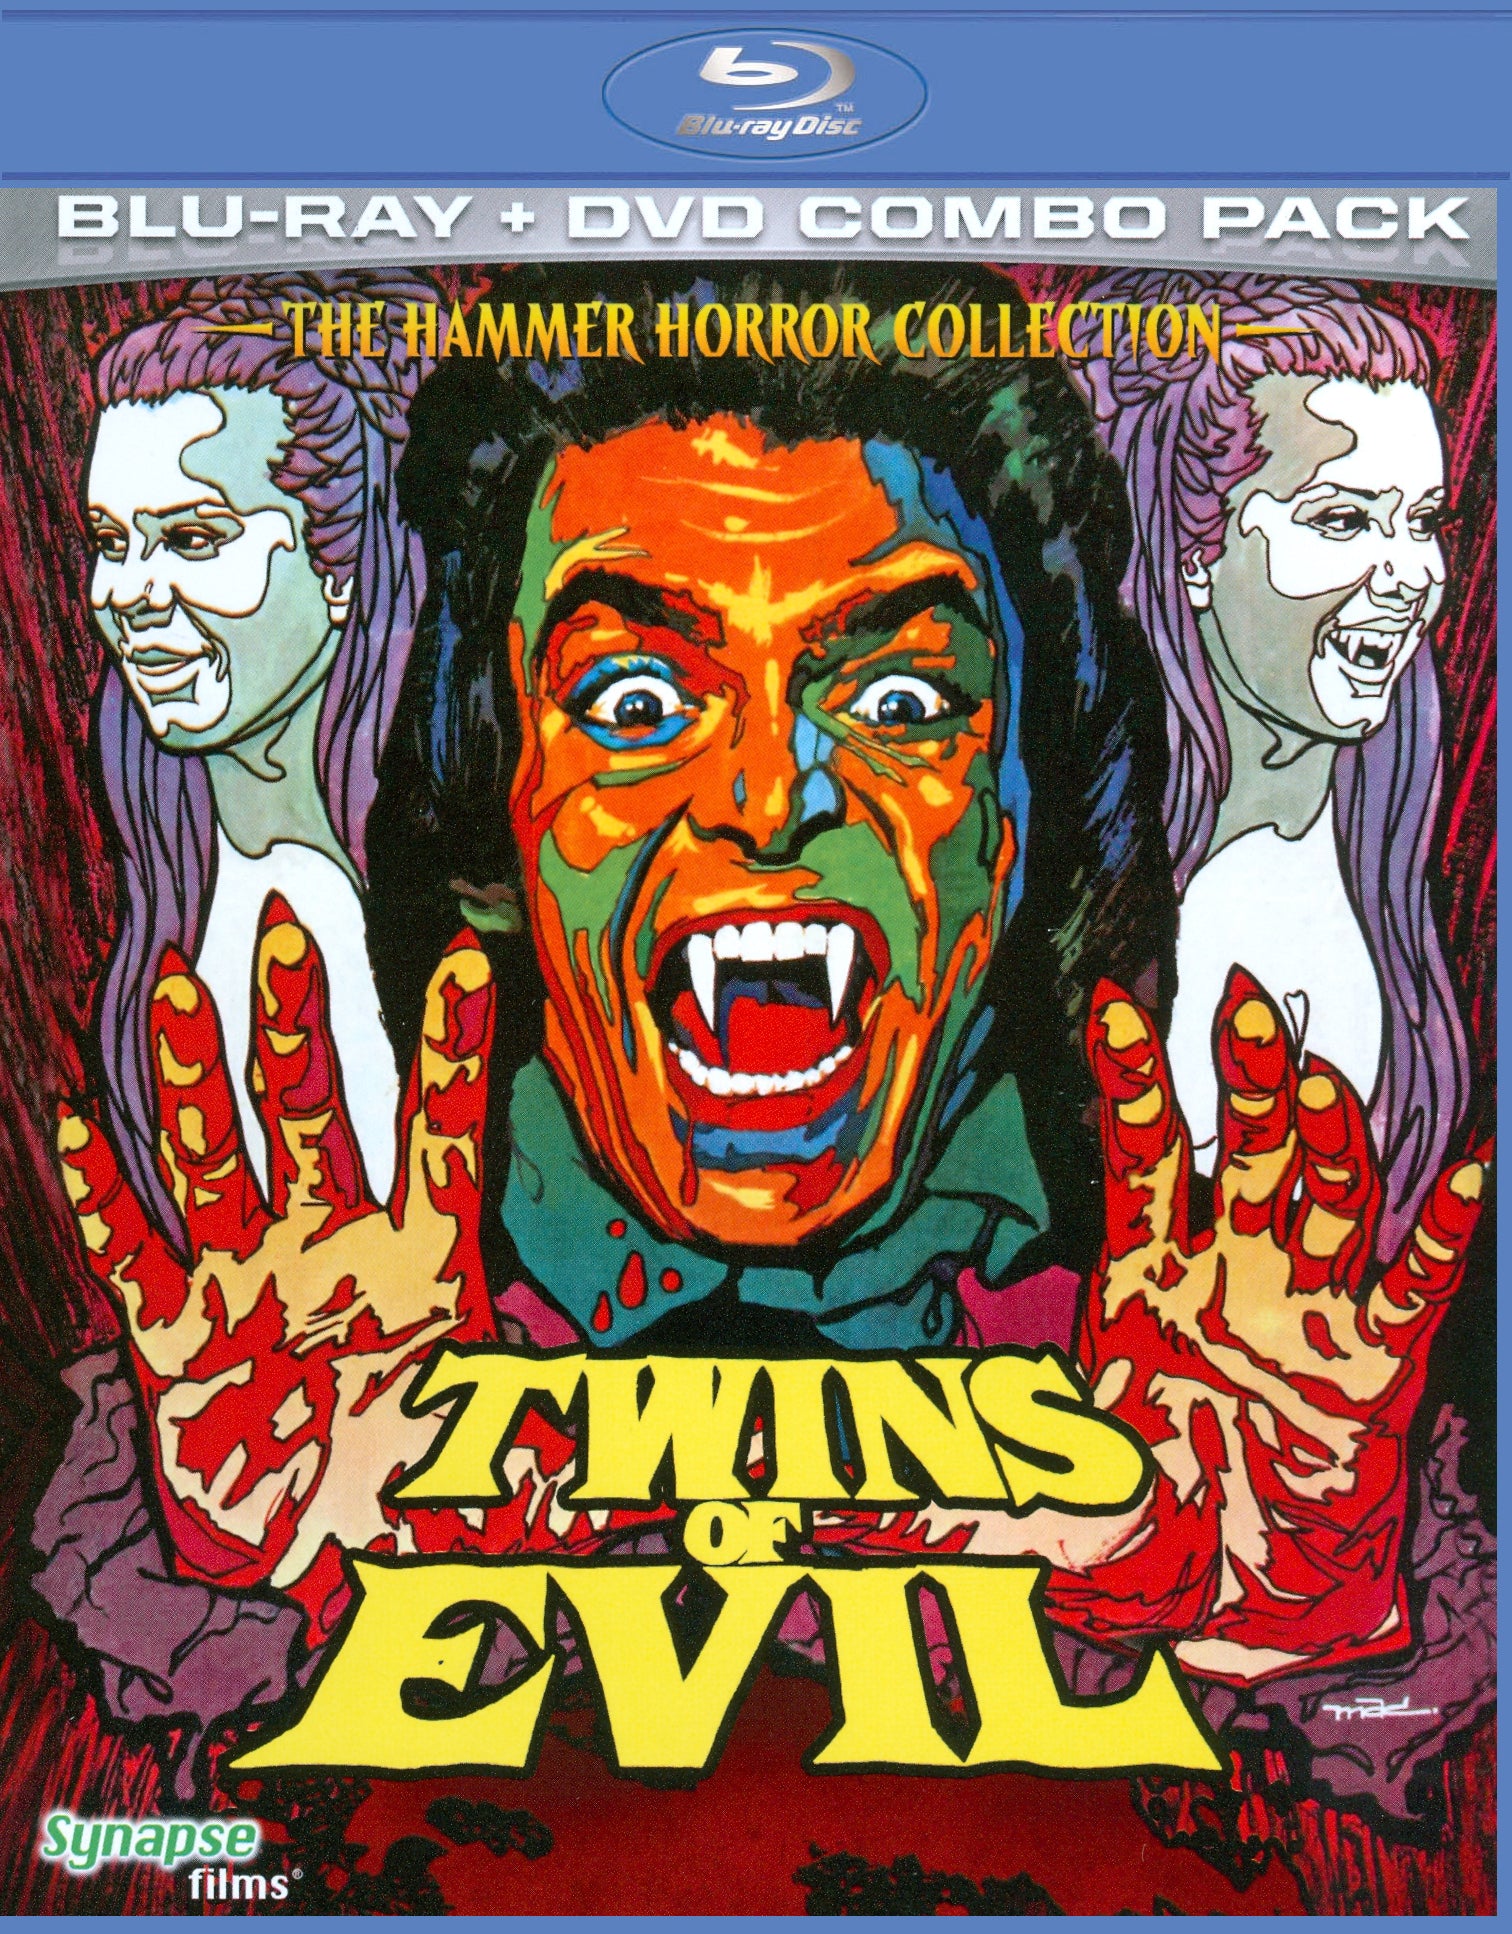 TWINS OF EVIL cover art